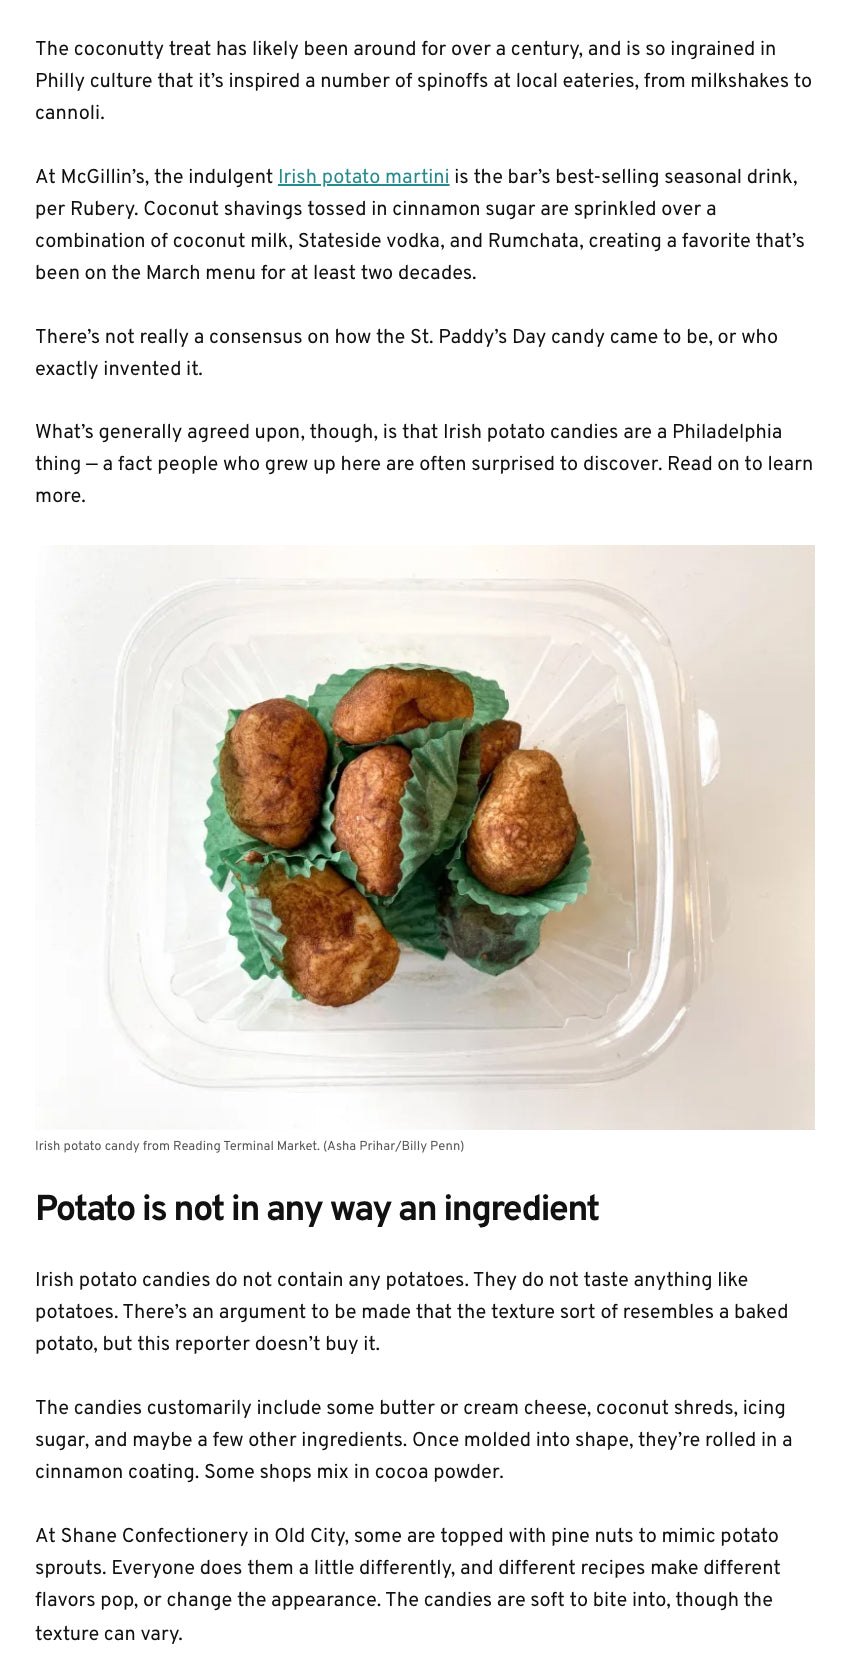 Potato is not in any way an ingredient